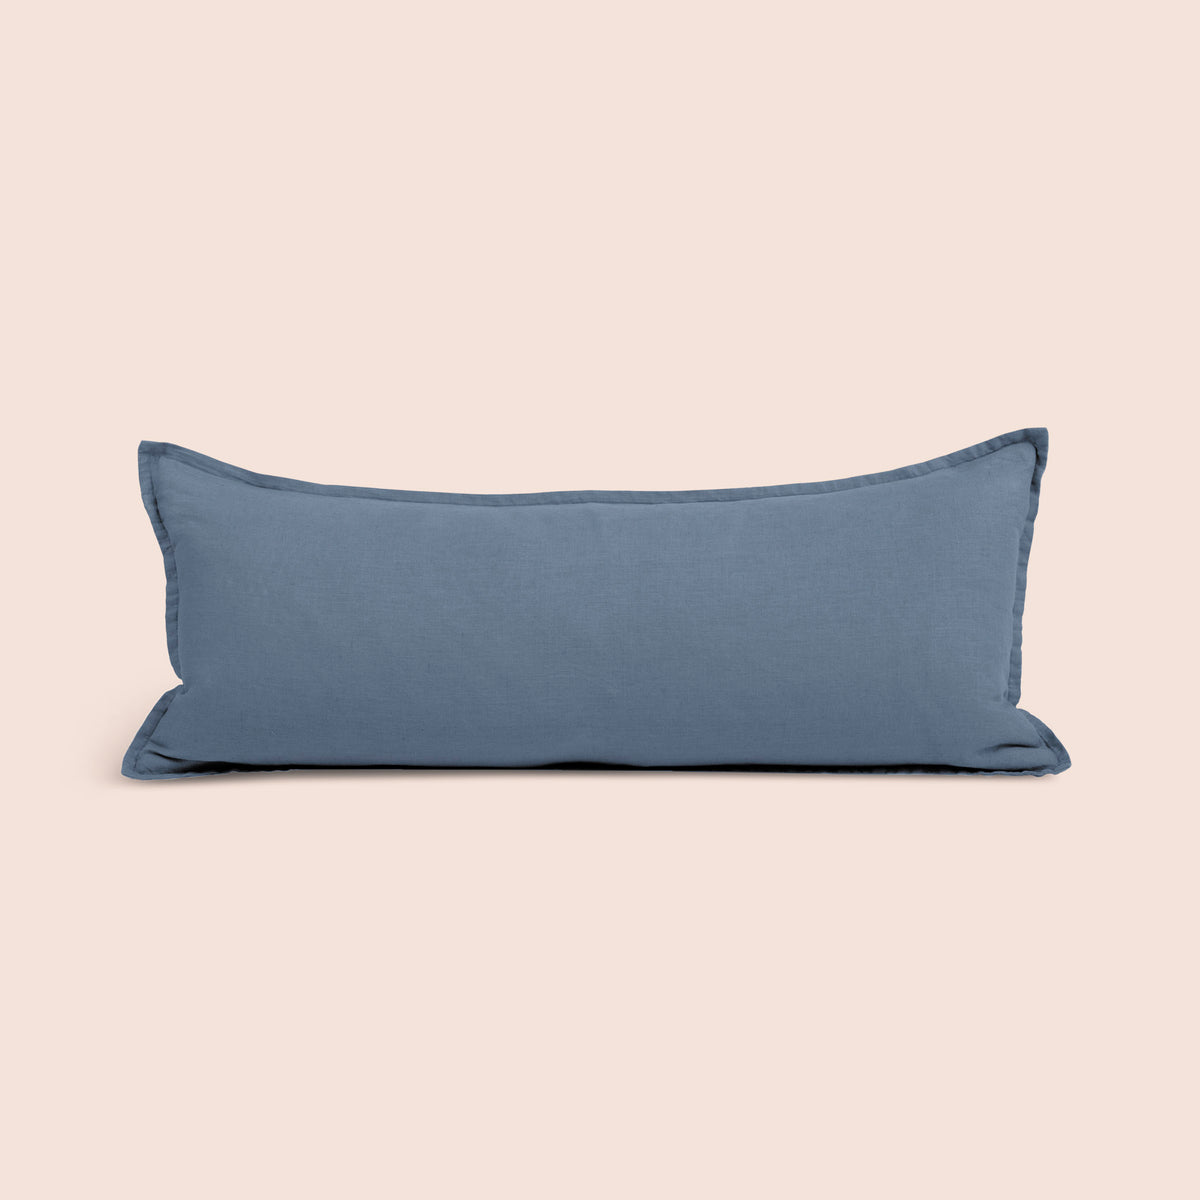 Image of Catalina Blue Blended Linen Lumbar Pillow Cover on a lumbar pillow with a light pink background